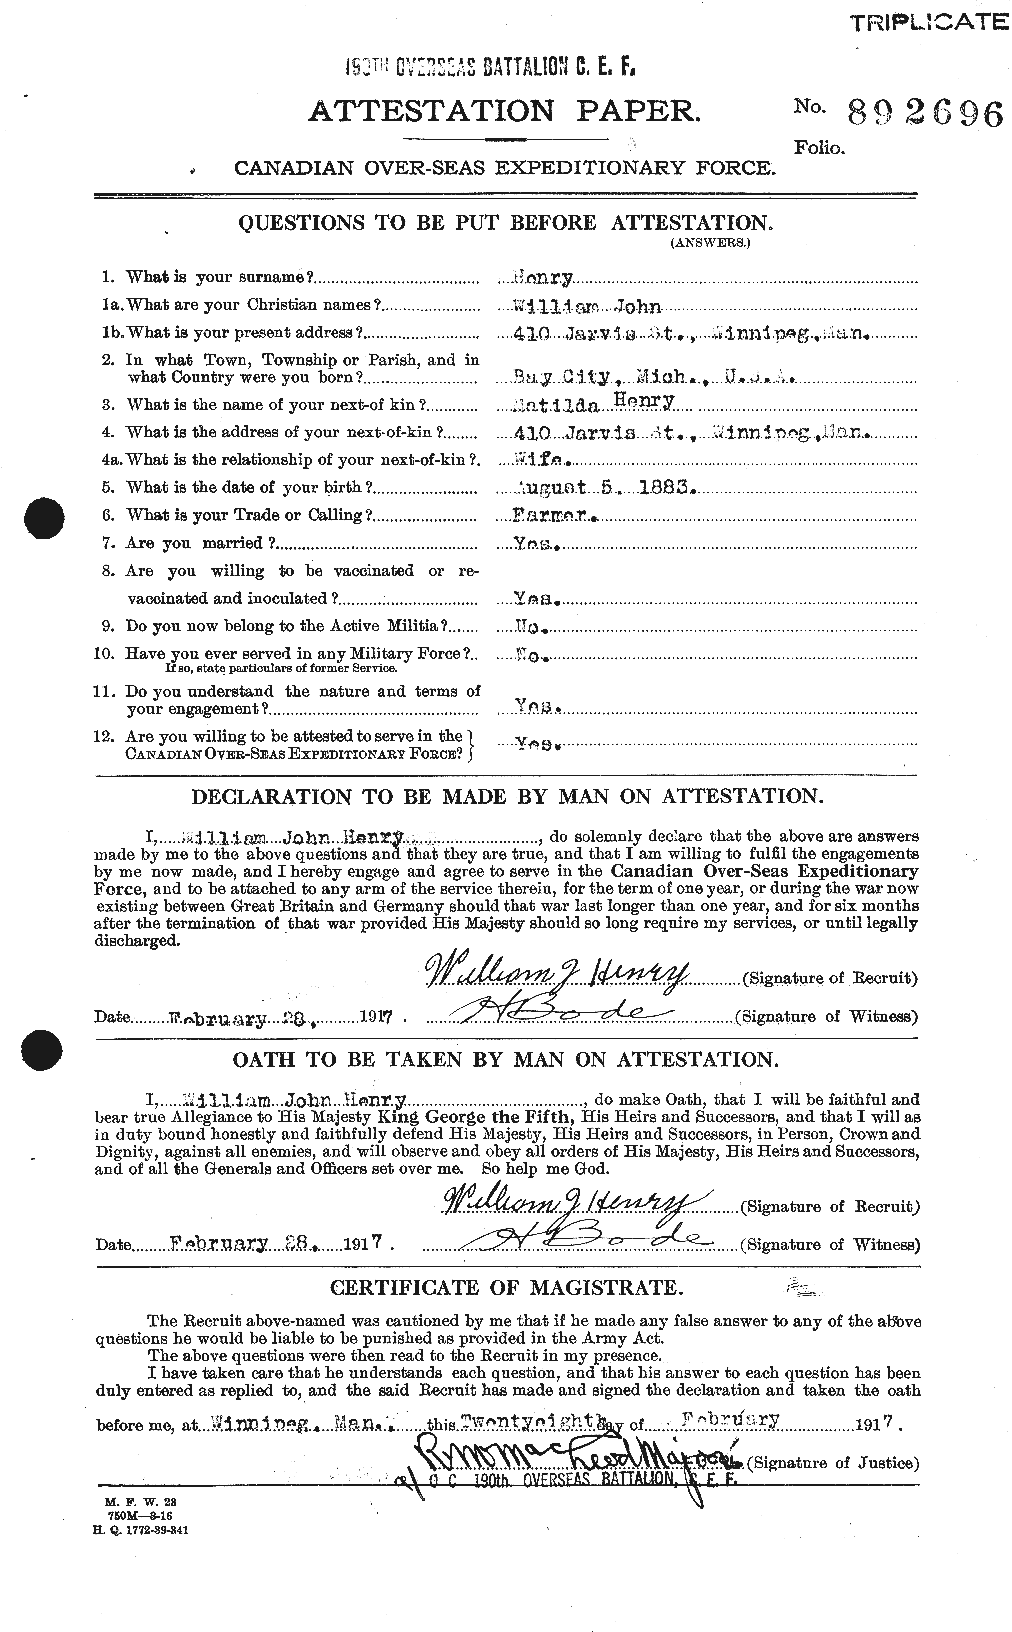 Personnel Records of the First World War - CEF 387783a